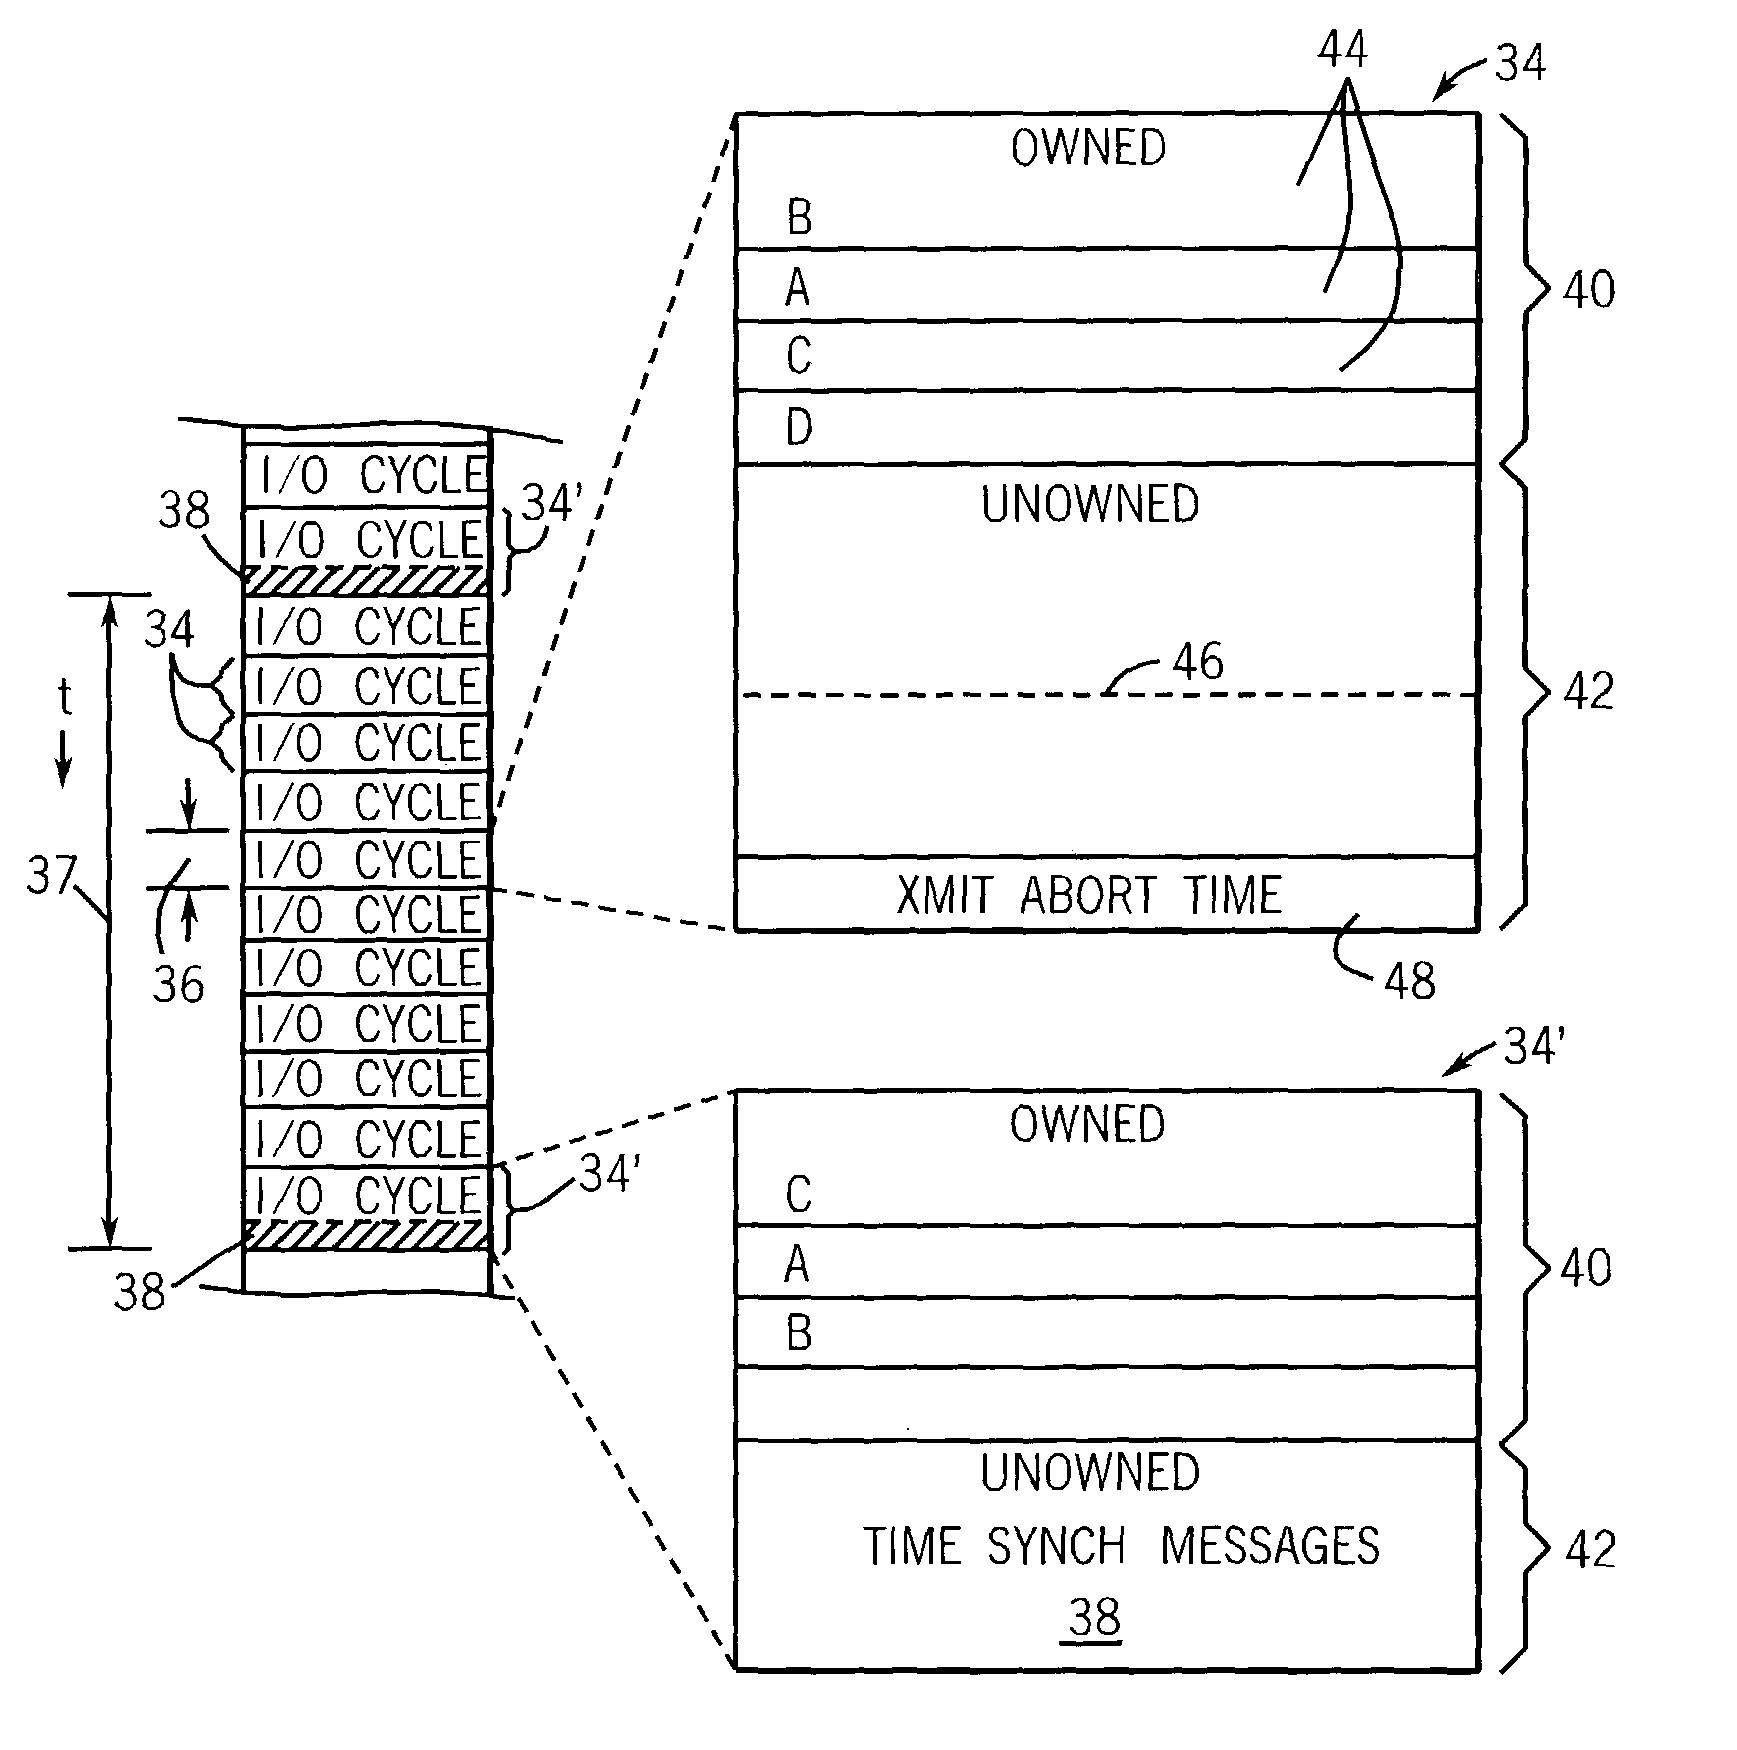 Industrial controller providing deterministic communication on ethernet